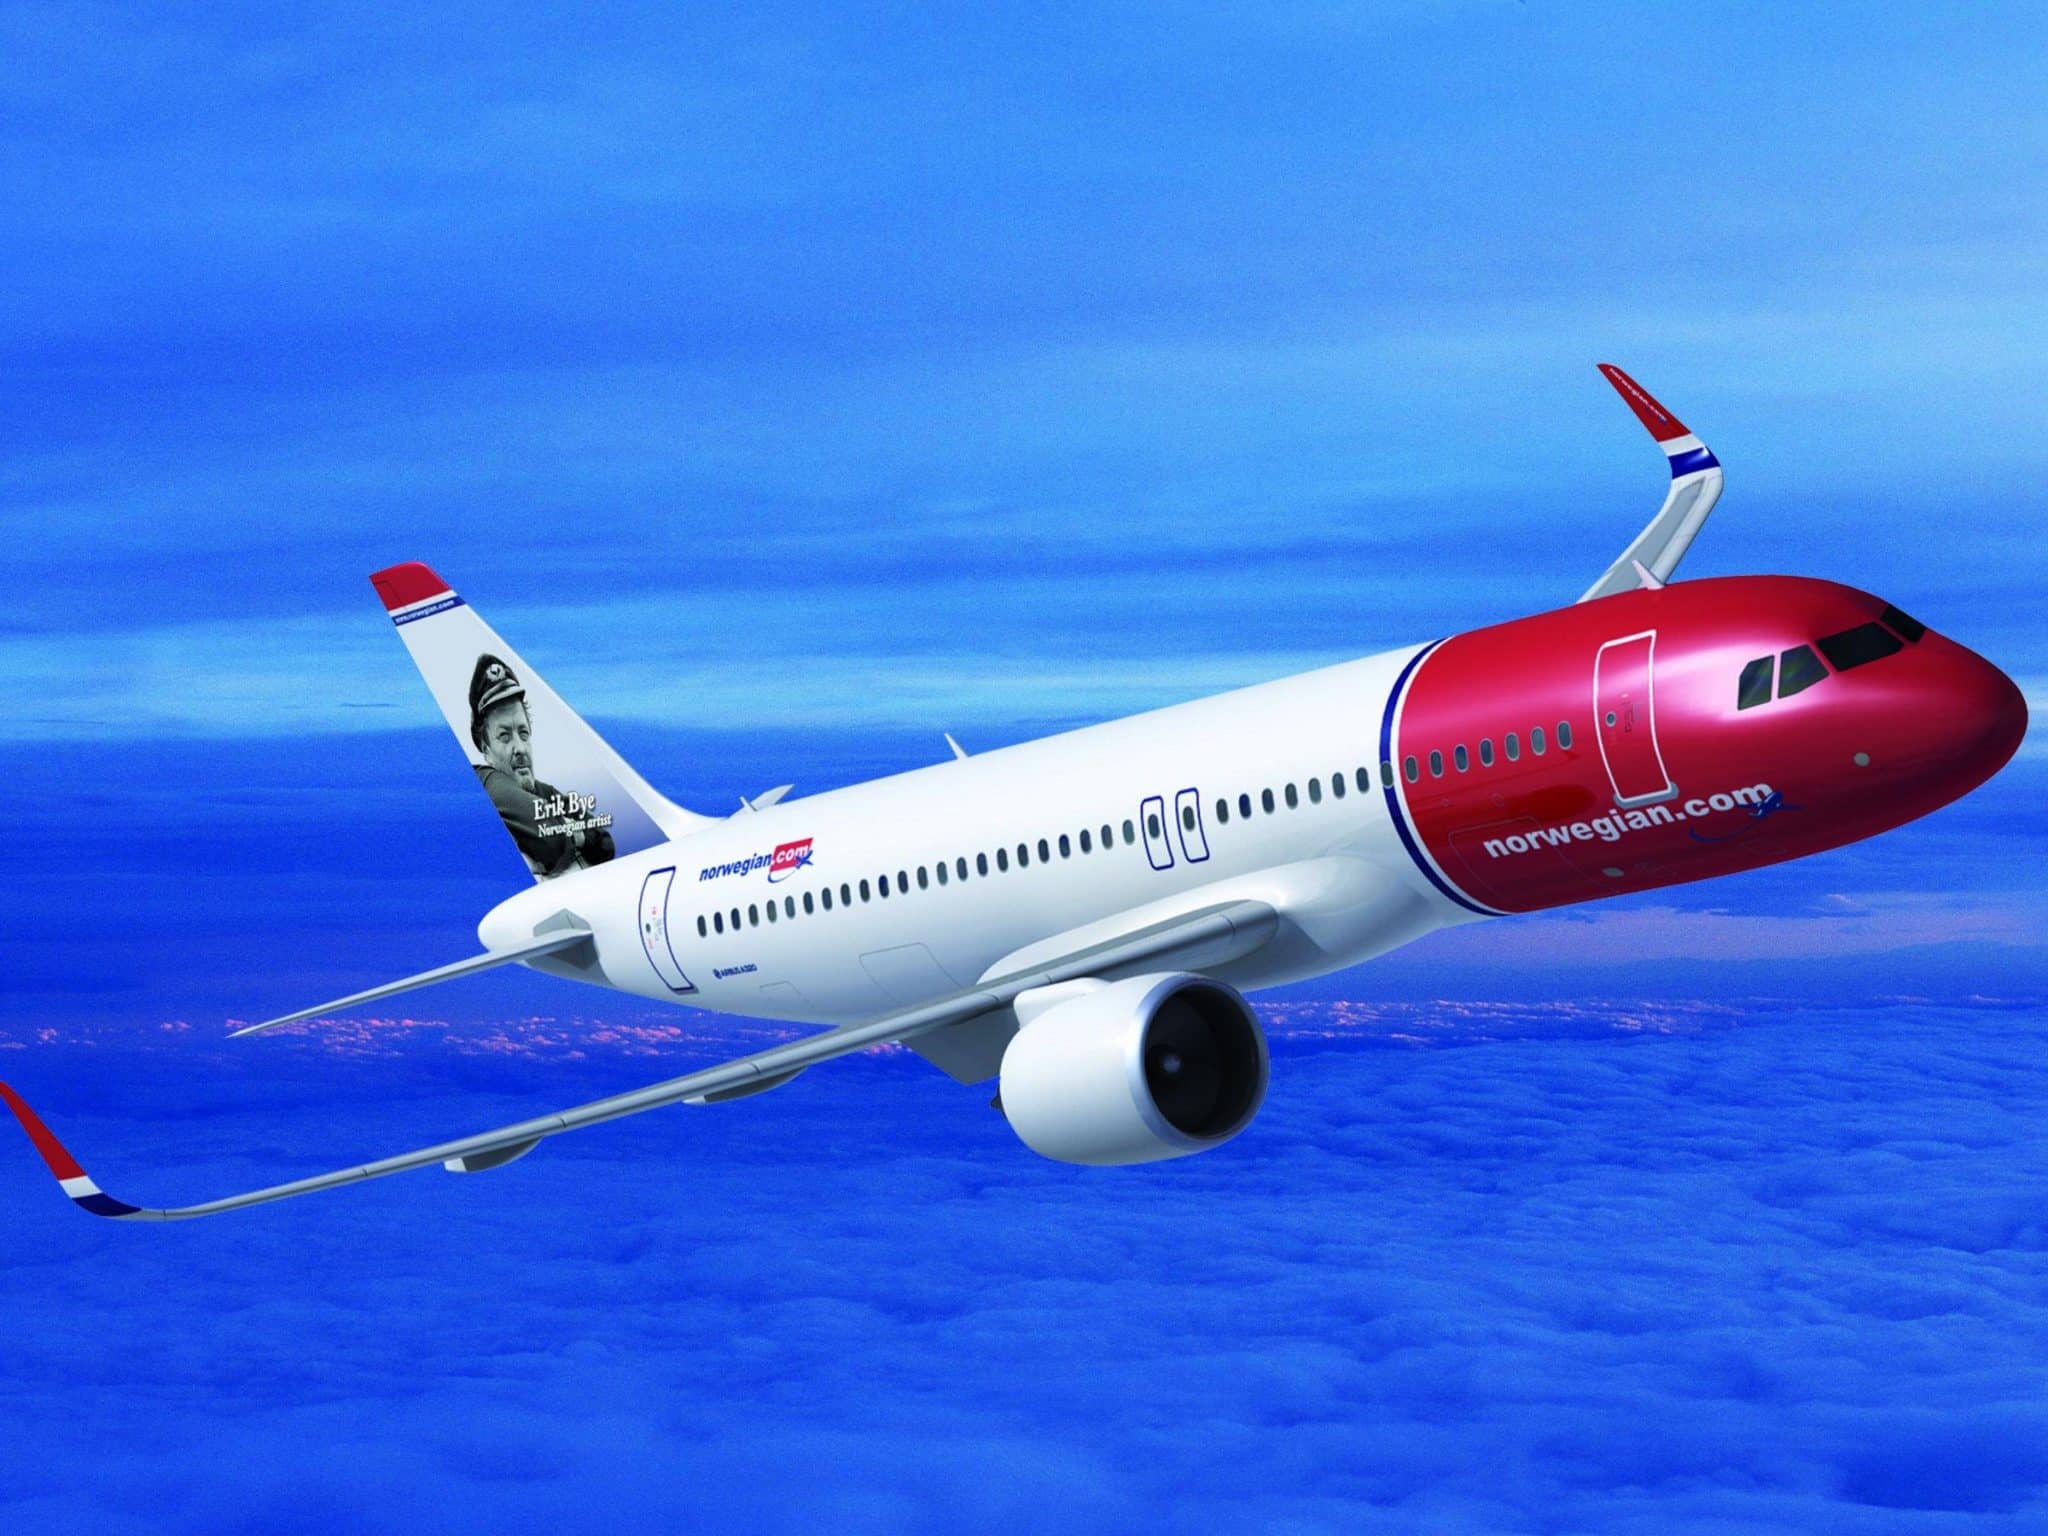 First international low-cost carrier to operate in Brazil